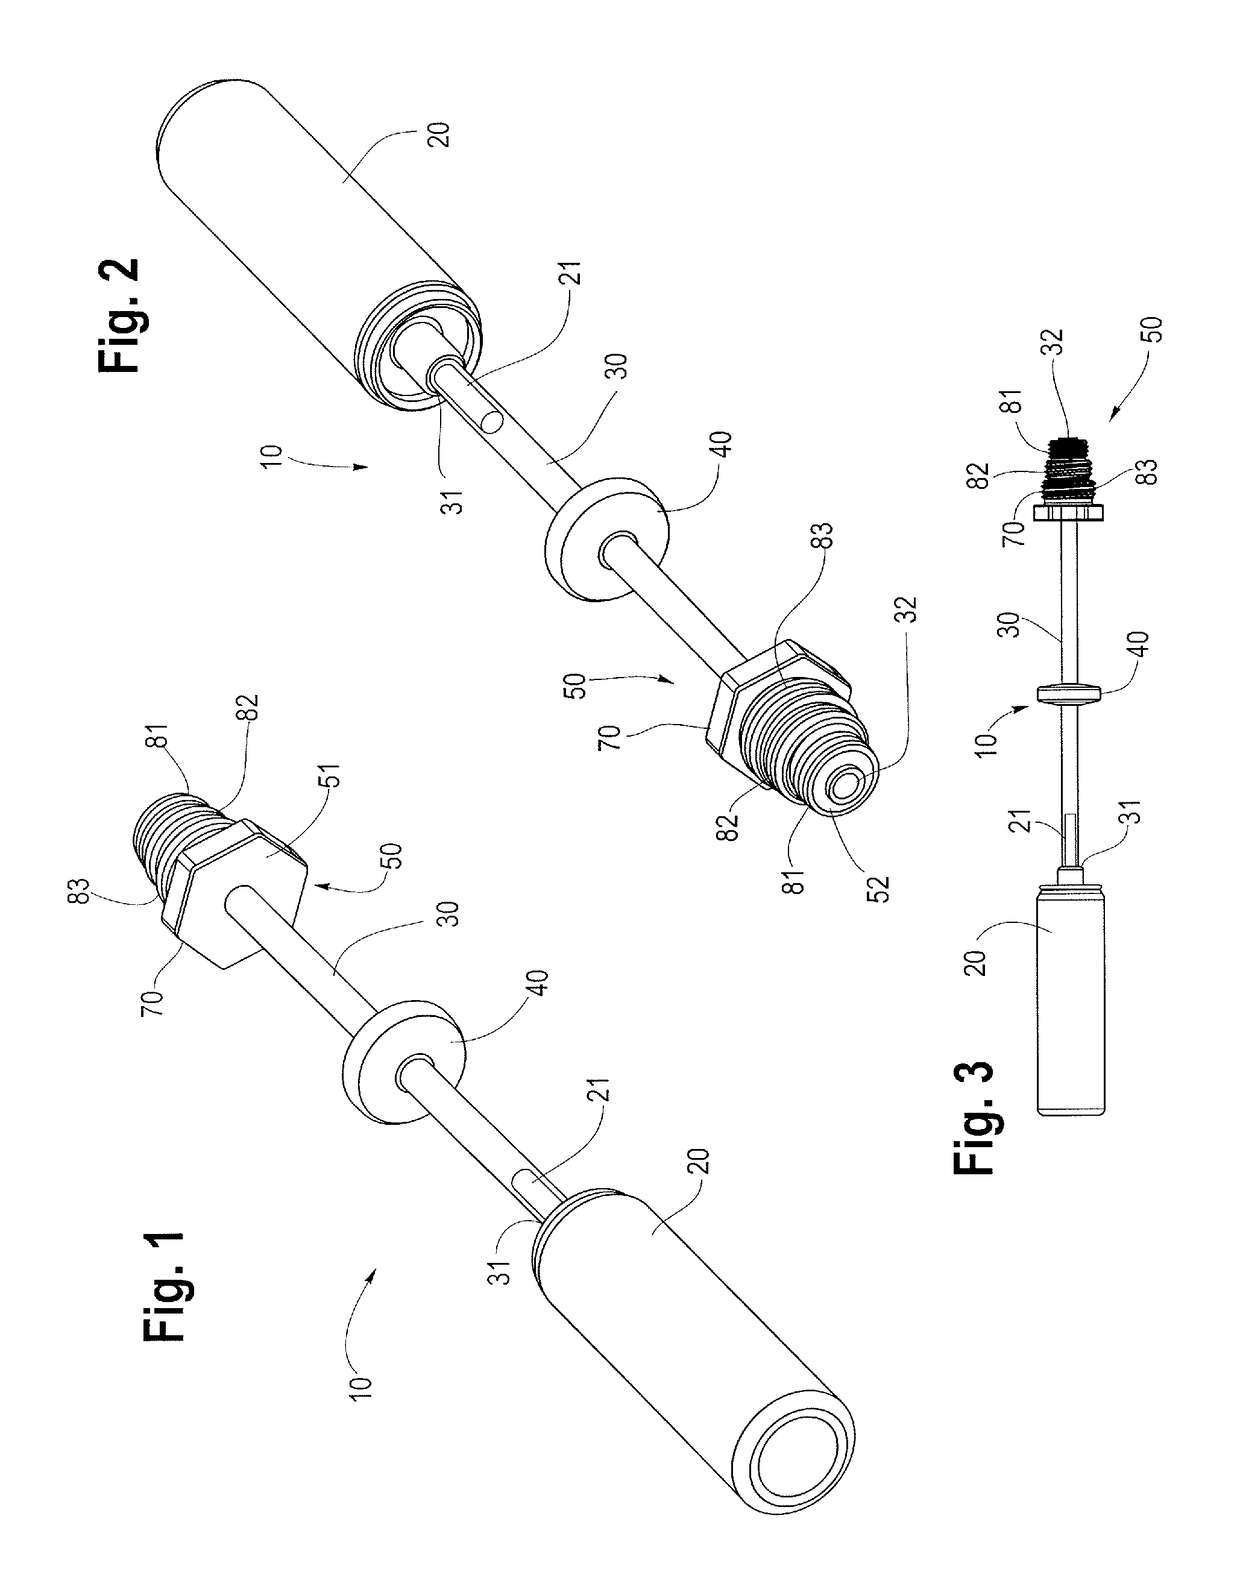 Oil injection adapter and system